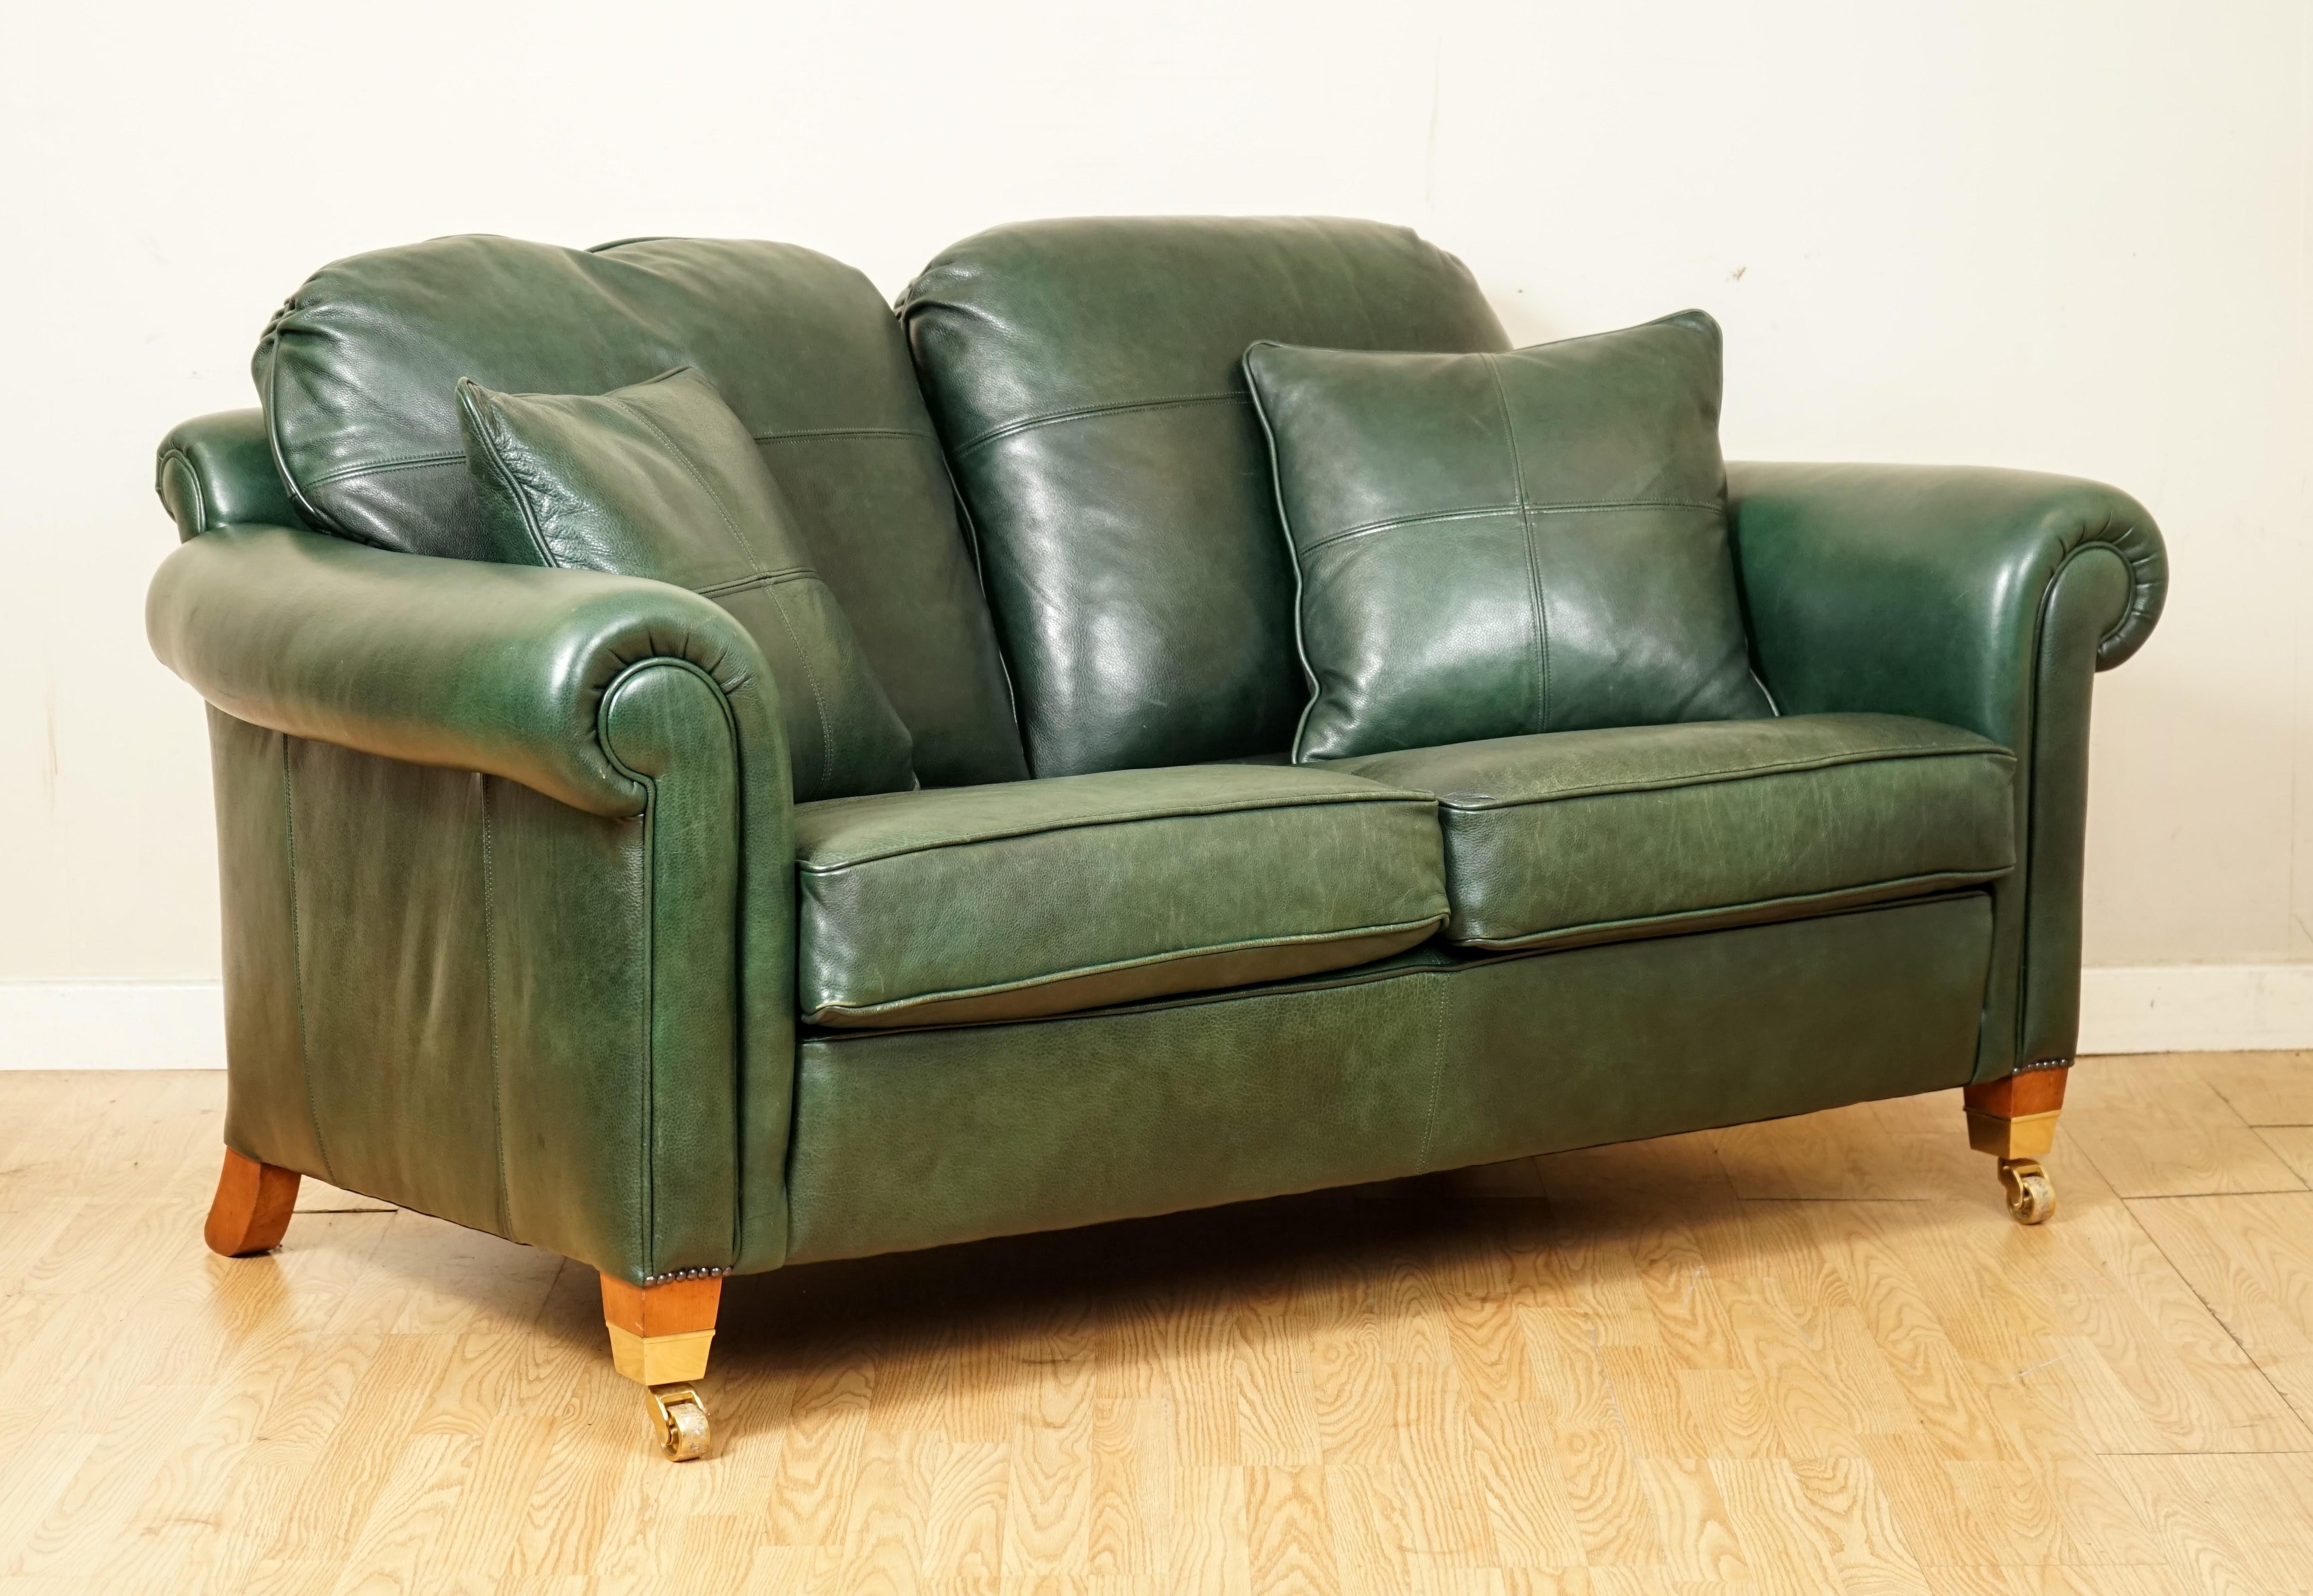 We are so excited to present to you this Stunning Duresta Feather Filled Green Leather Sofa. 

Duresta are renowned for their 'Pure English Luxury'. Based in Nottinghamshire, their team of highly skilled crafts-people have been hand assembling